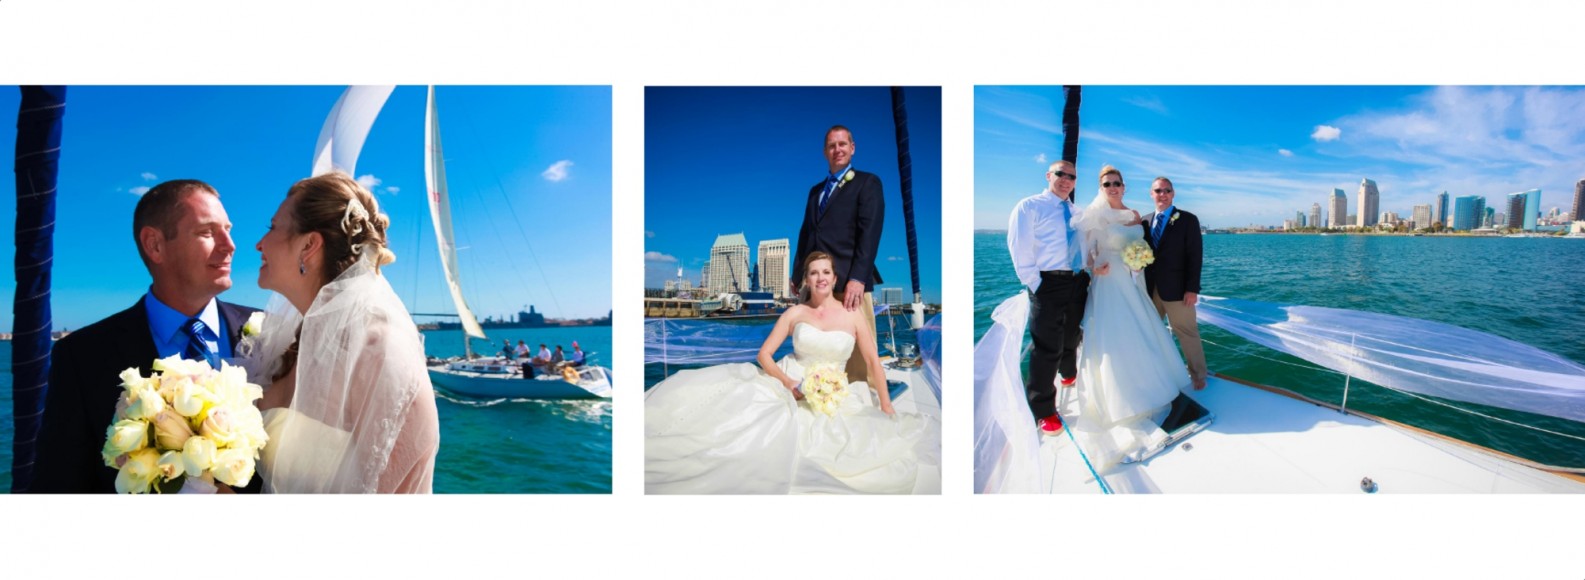 Laura and Davids Wedding Book - San Diego Yacht Wedding by Wedding Photographers Andrew Abouna - Pages 24-25